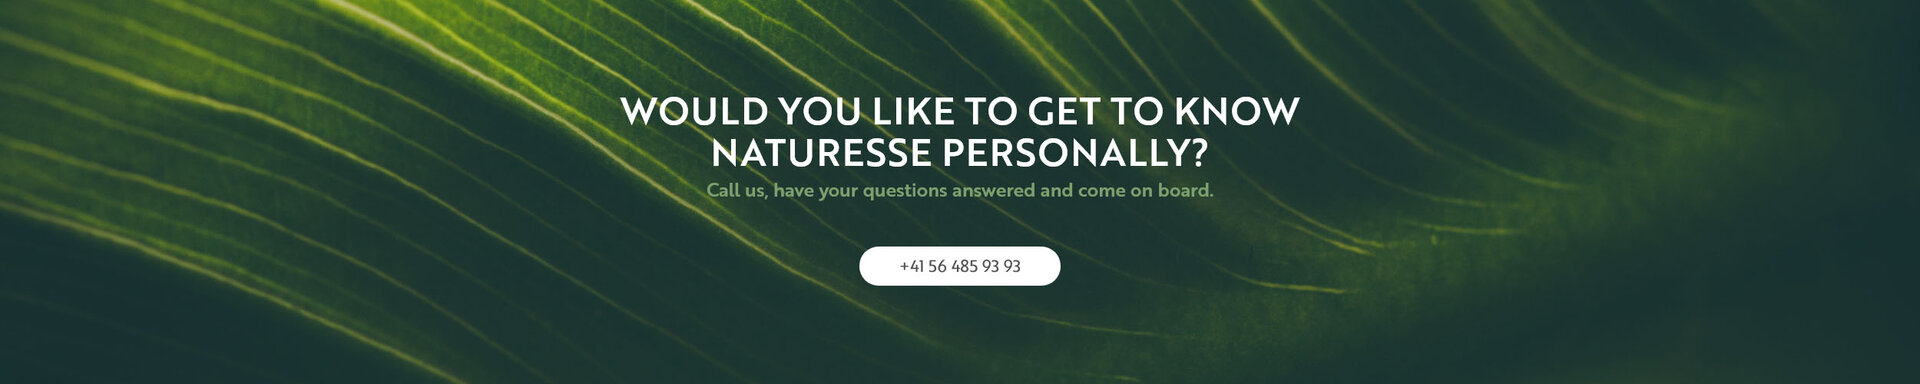 Would you like to get to know naturesse personally?